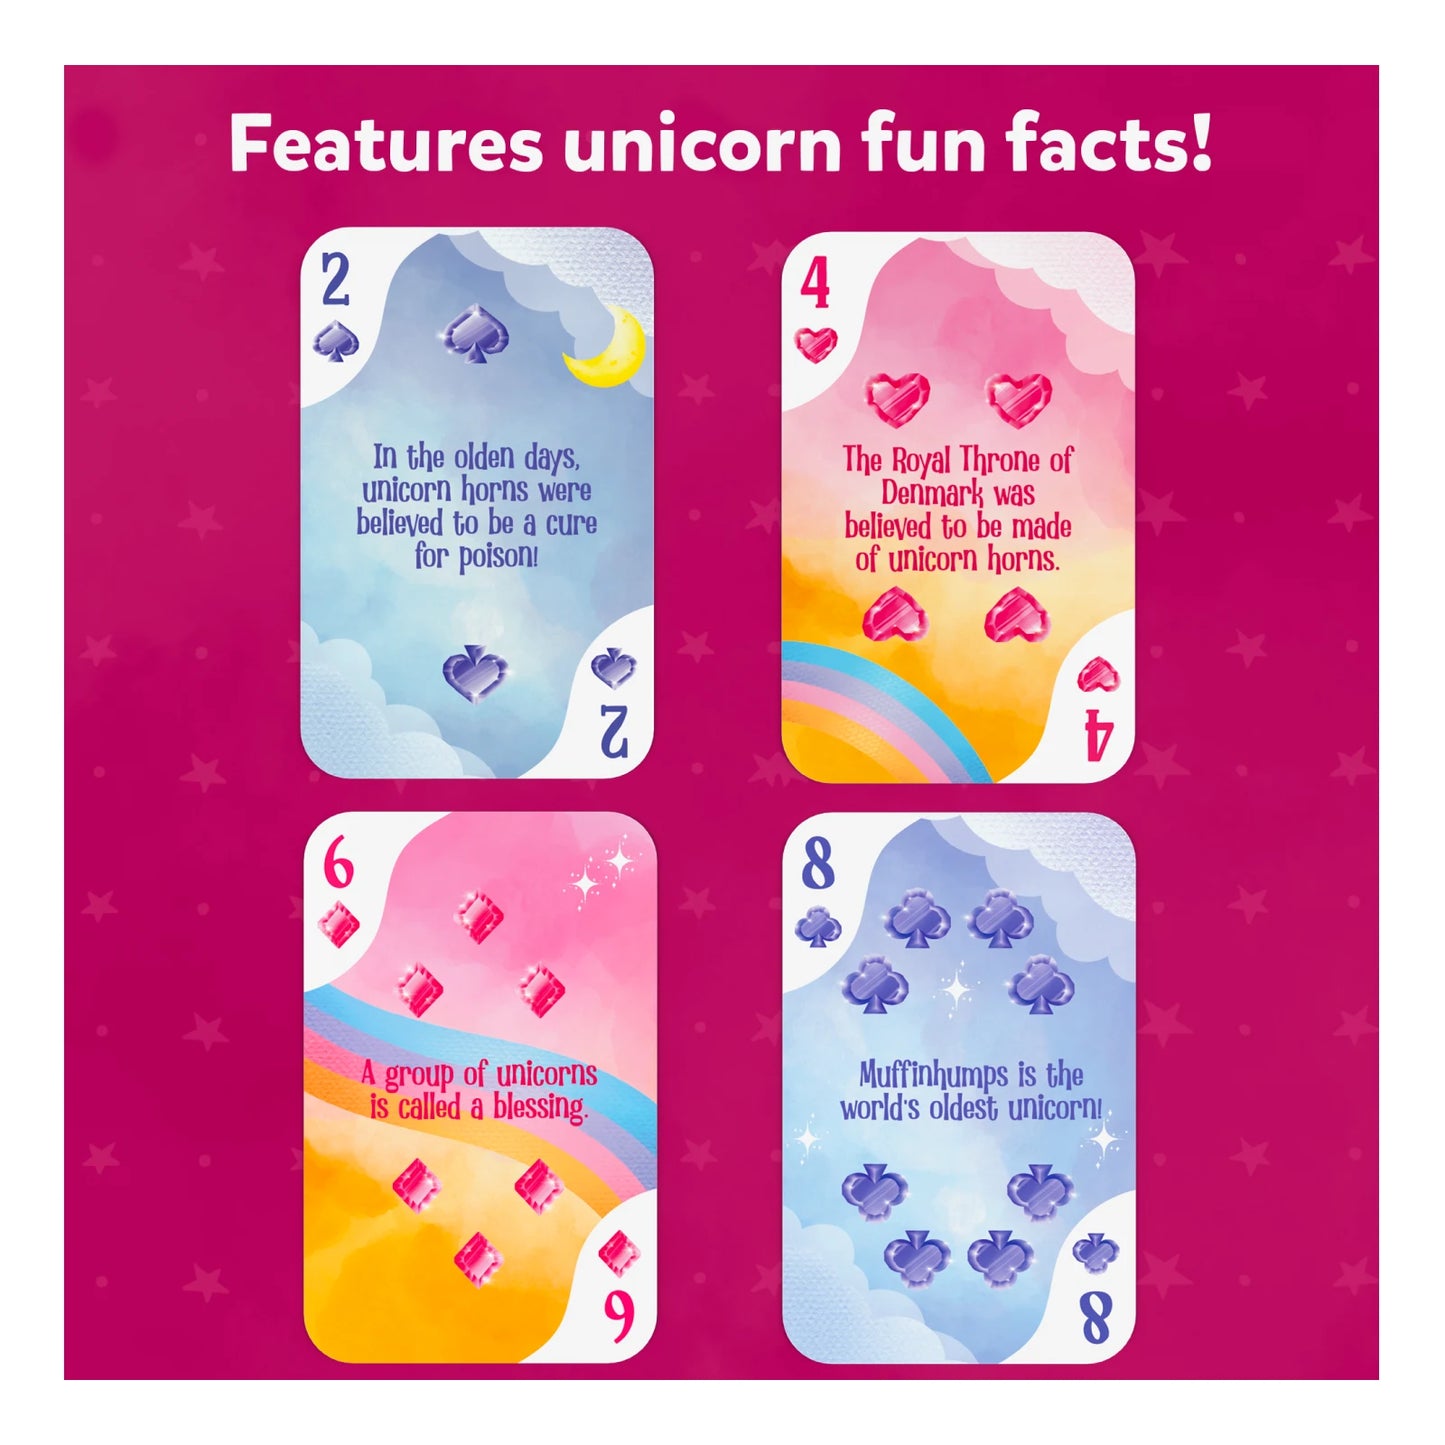 Unicorn Cards | 15 Packs Playing Cards Set (ages 4-7)